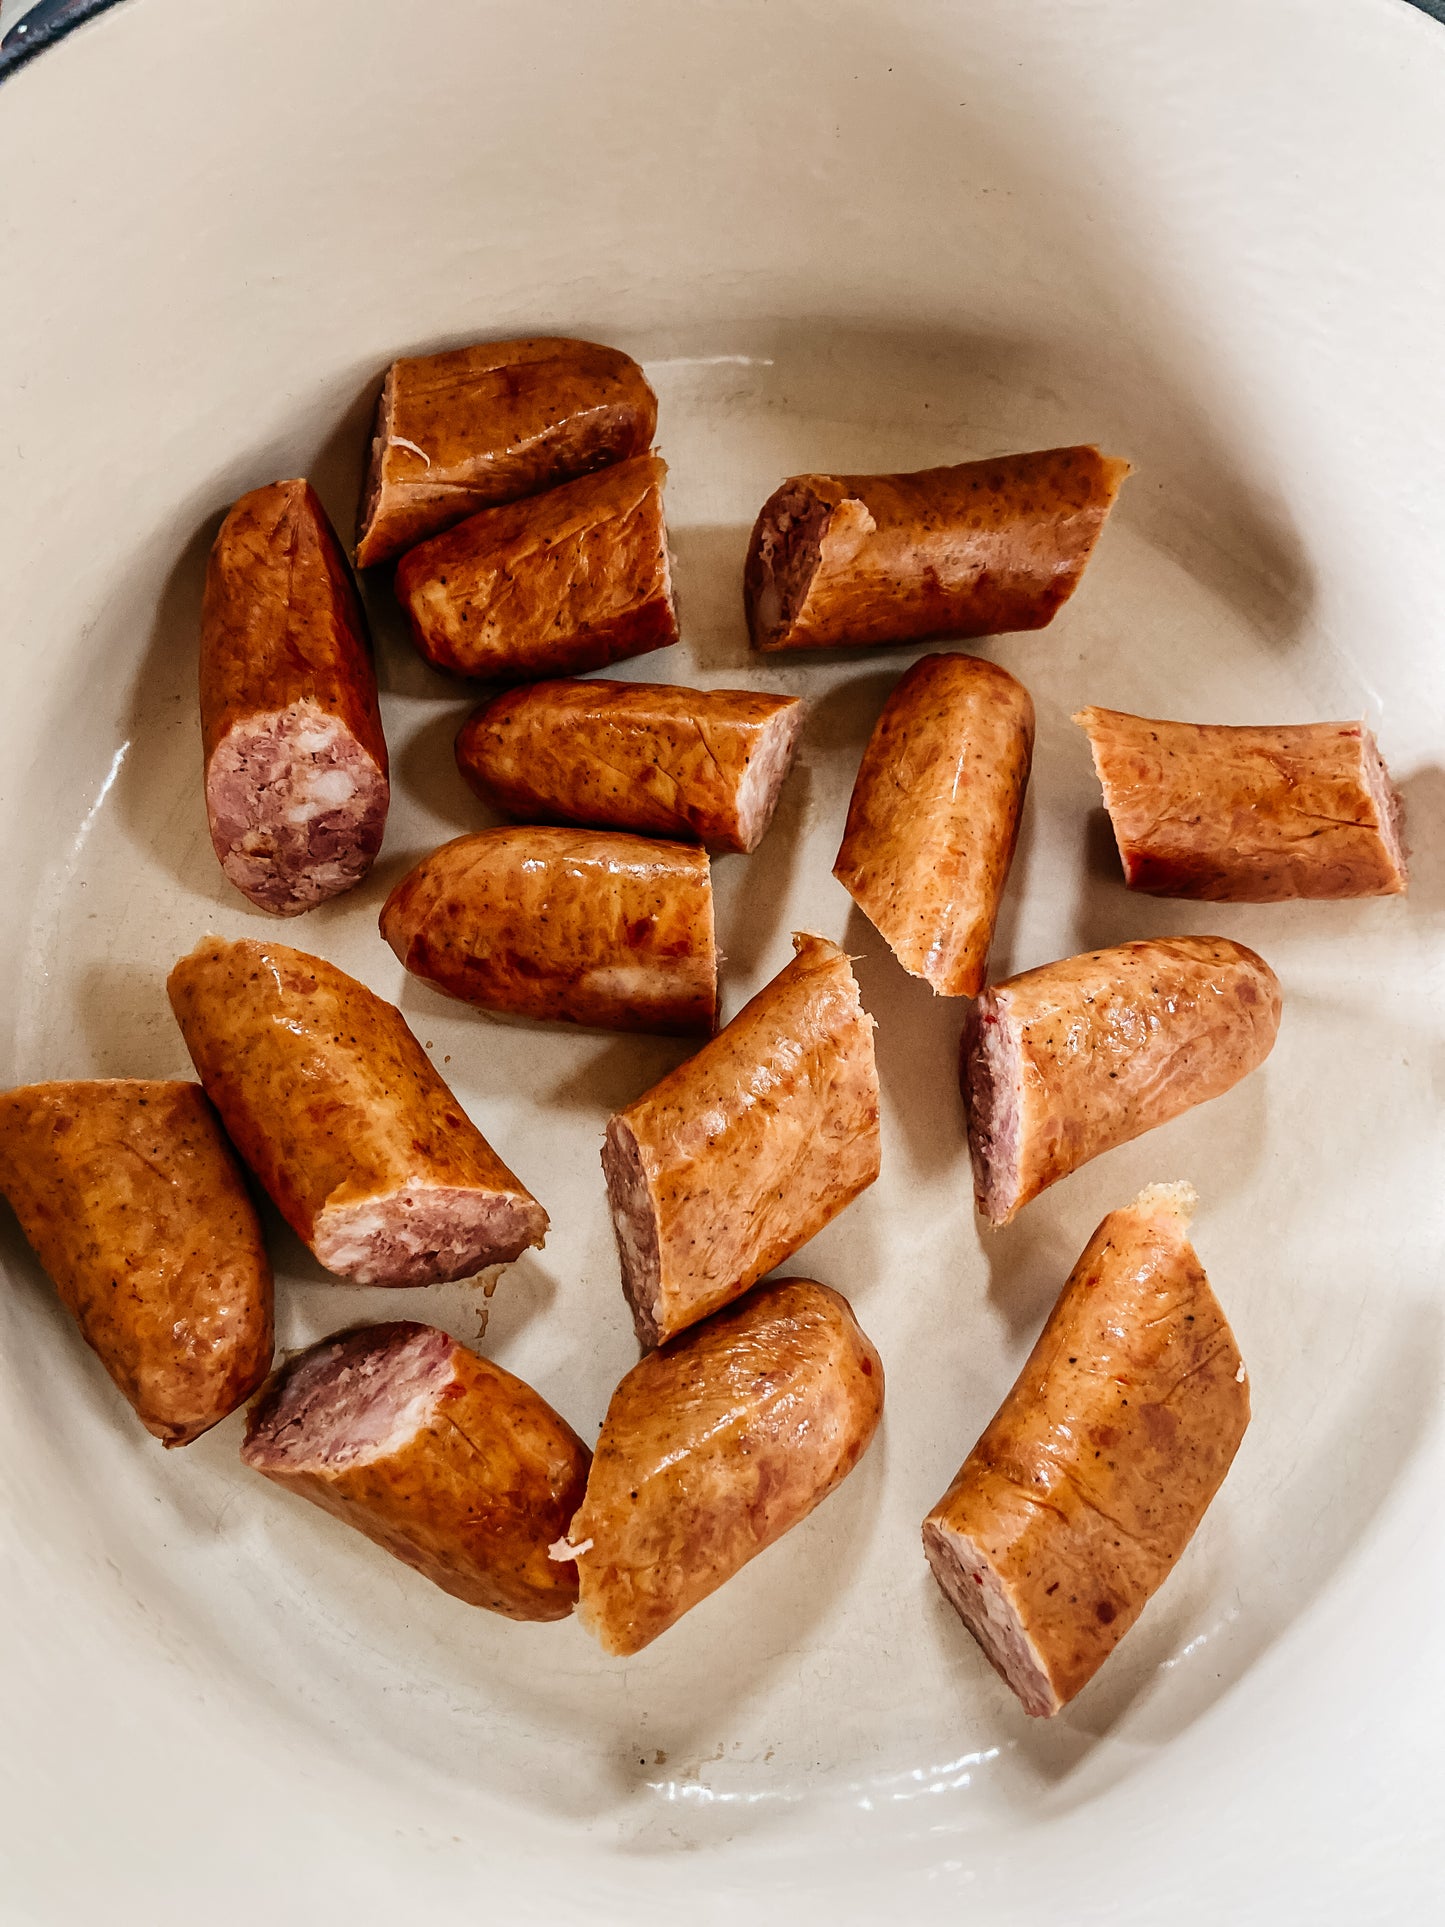 2 Packs of Andouille Sausage Links